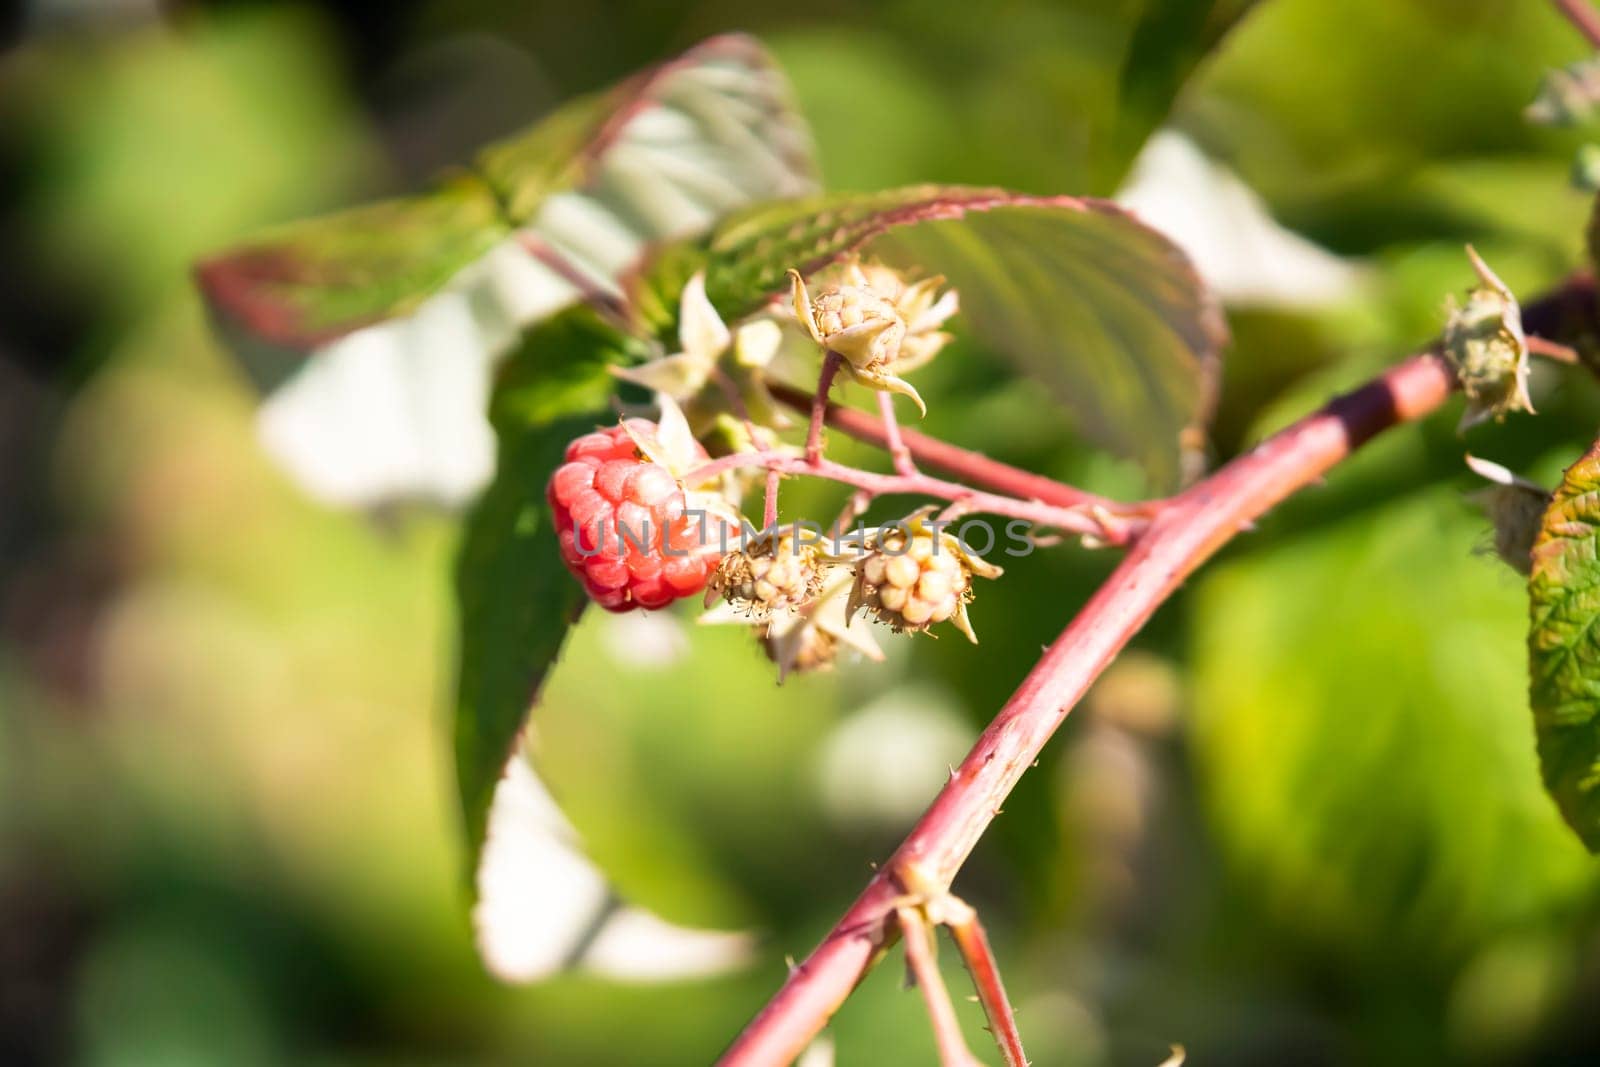 Closeup view of the sweet raspberry in the summer garden. by africapink